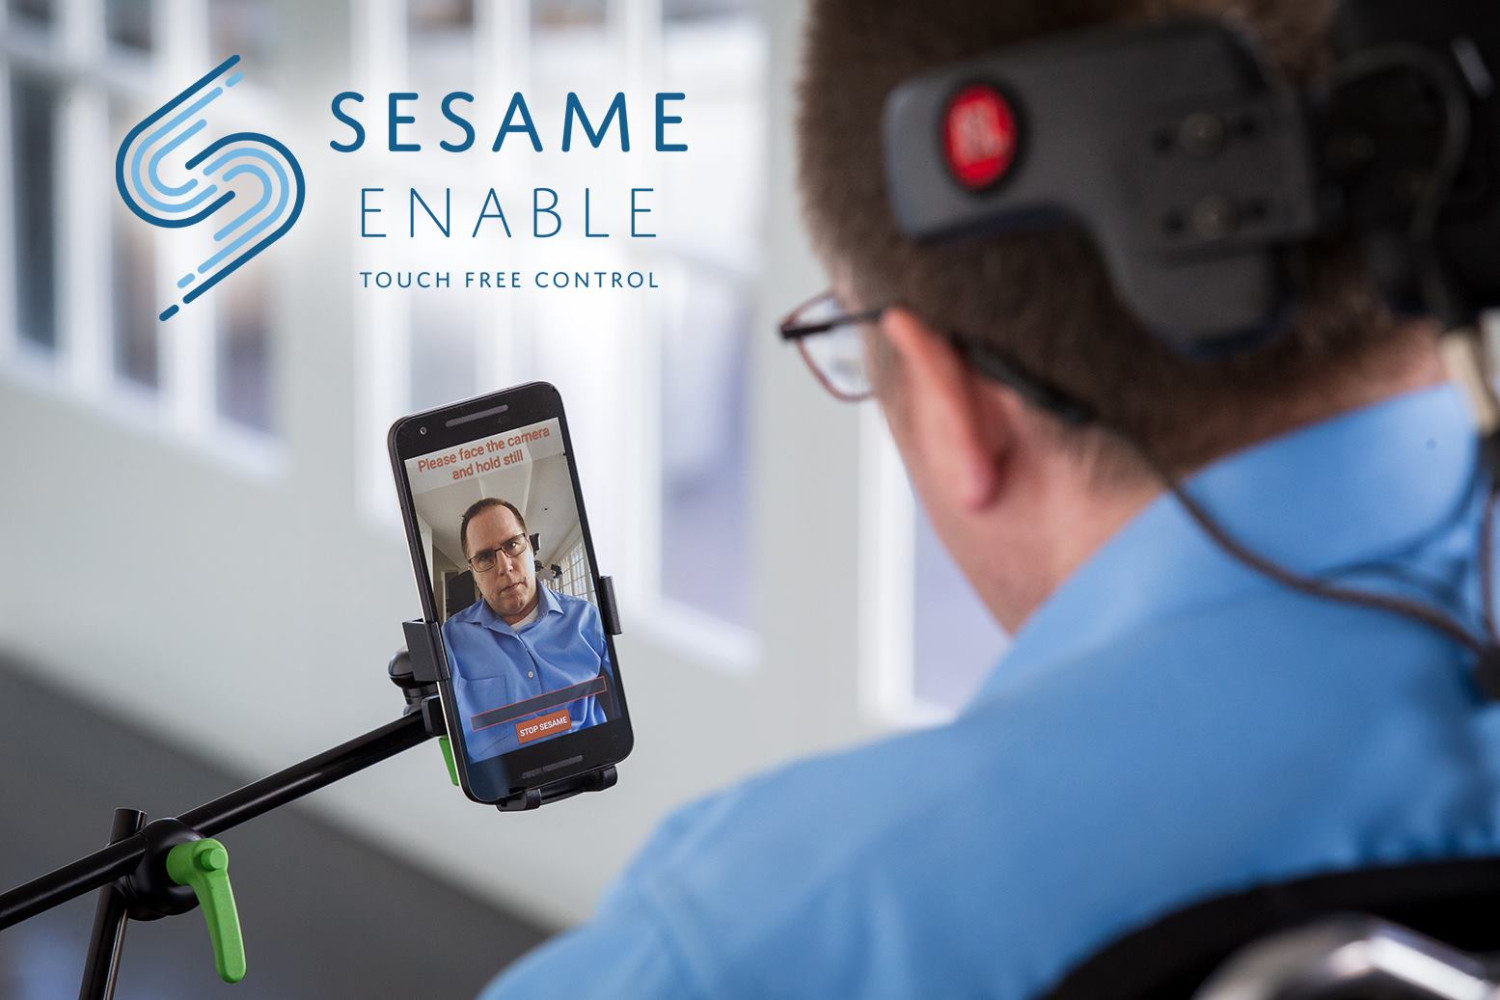 Sesame Enable hands-free mobile device being used by man in wheelchair